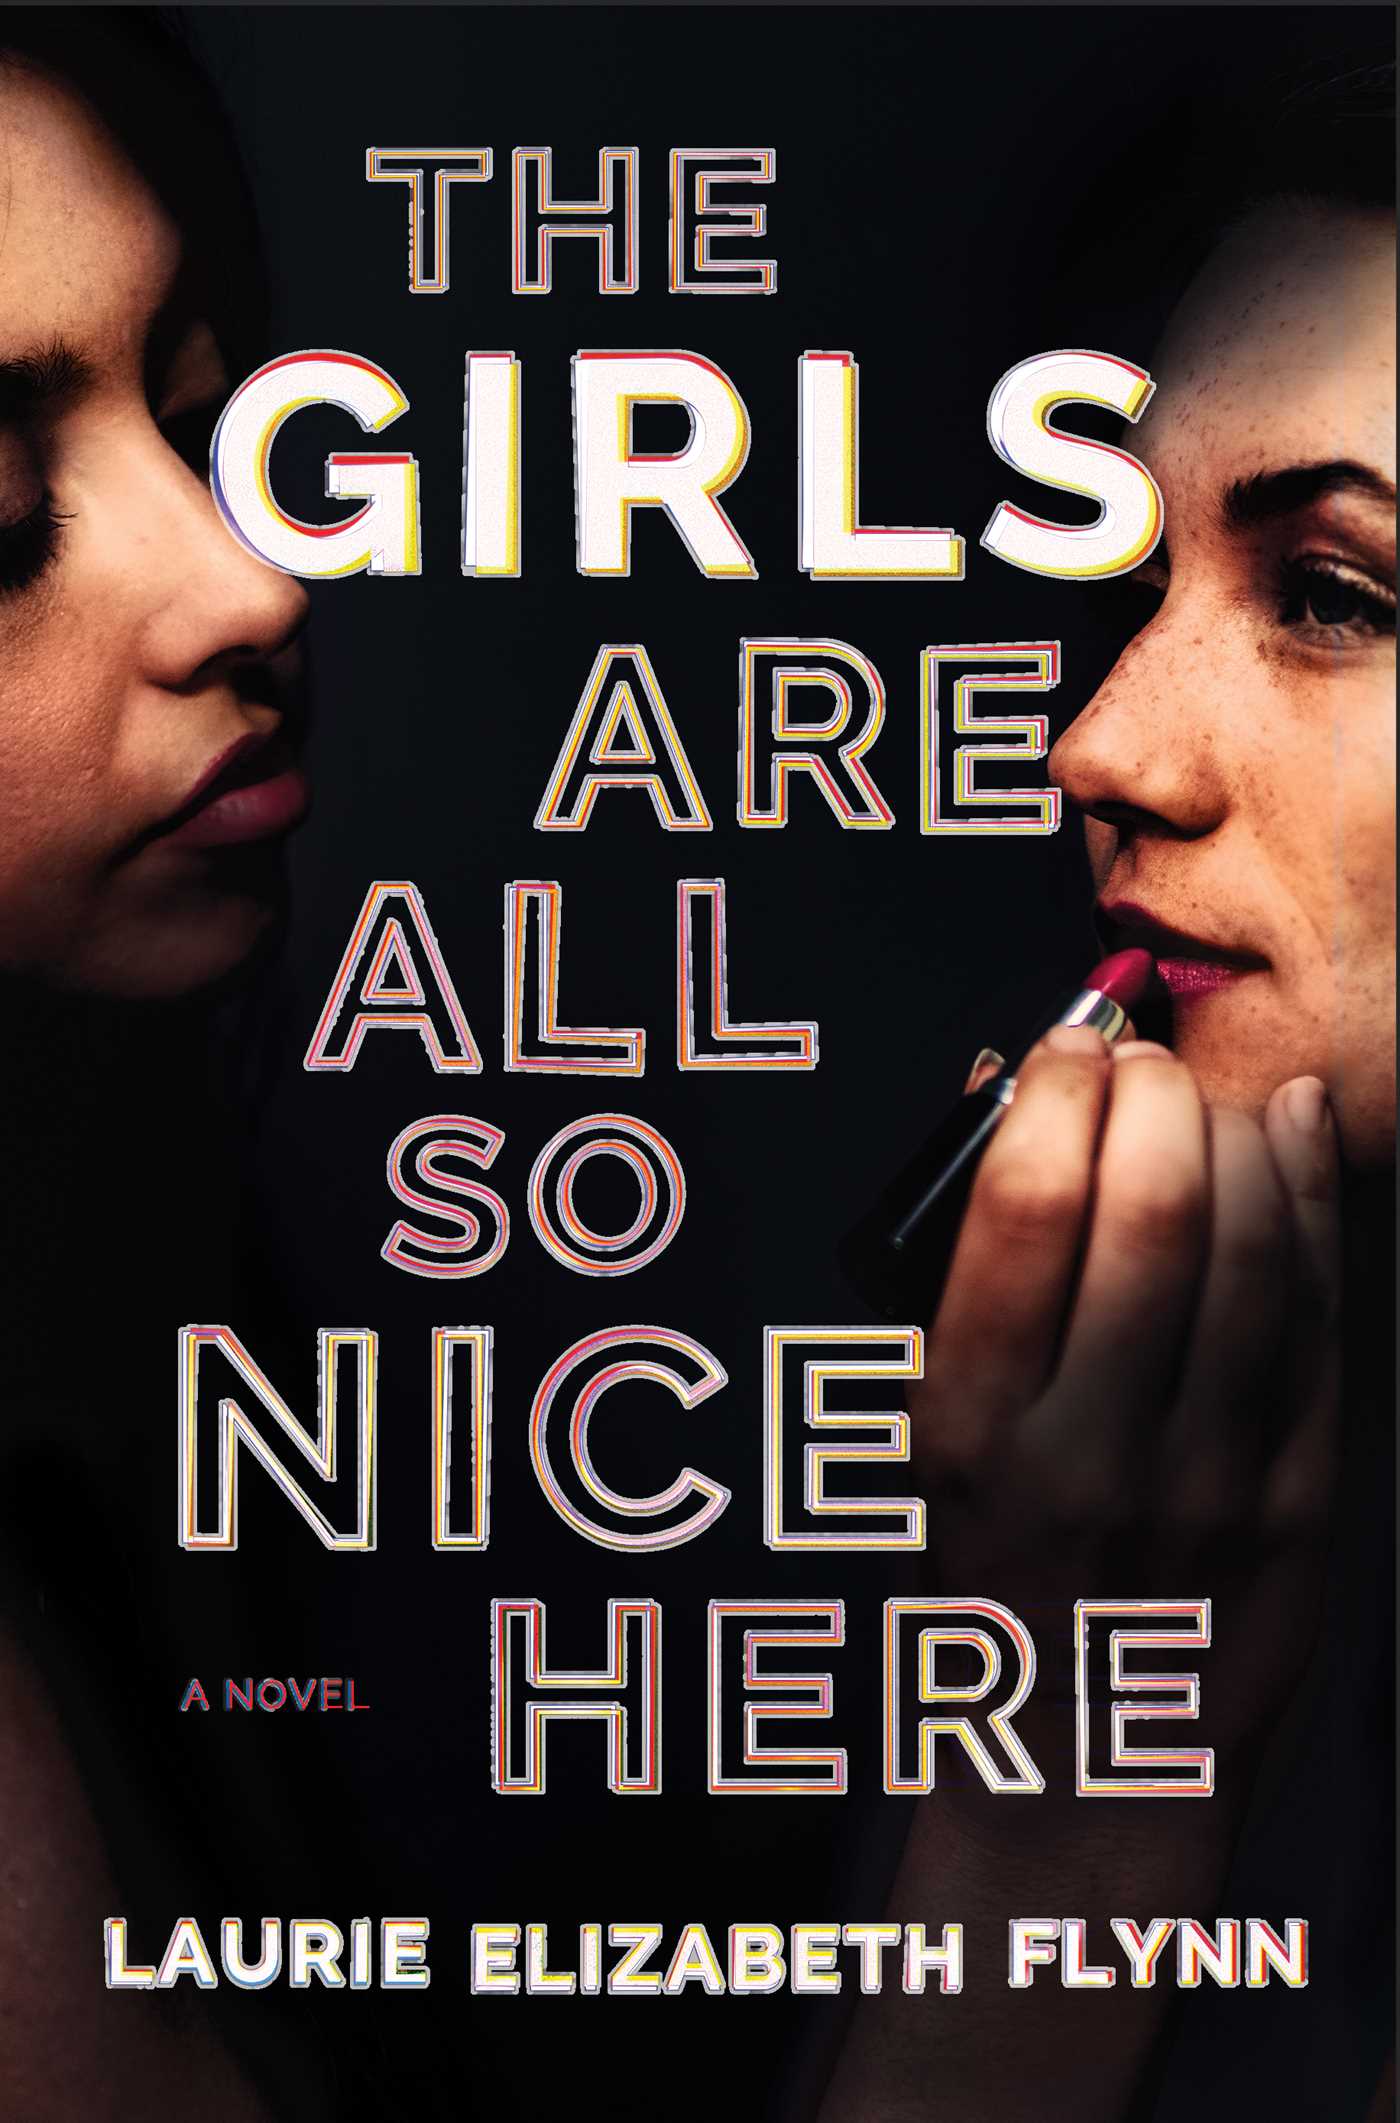 [EPUB] The Girls Are All So Nice Here by Laurie Elizabeth Flynn